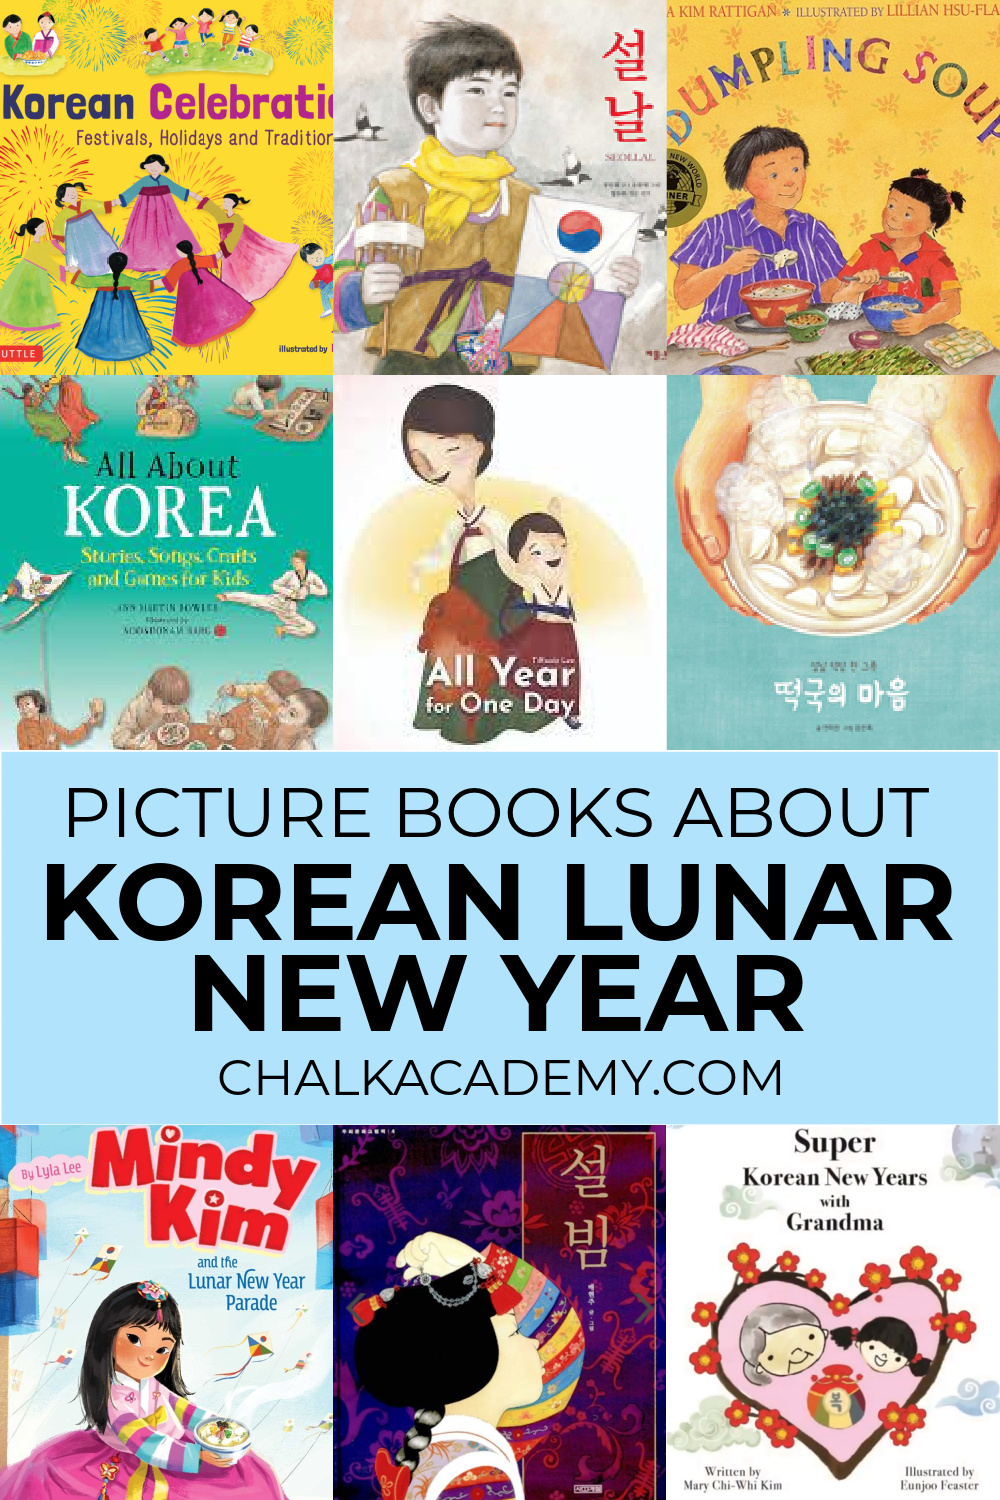 8 Fun Korean Lunar New Year Crafts and Activities for Kids! • CHALK